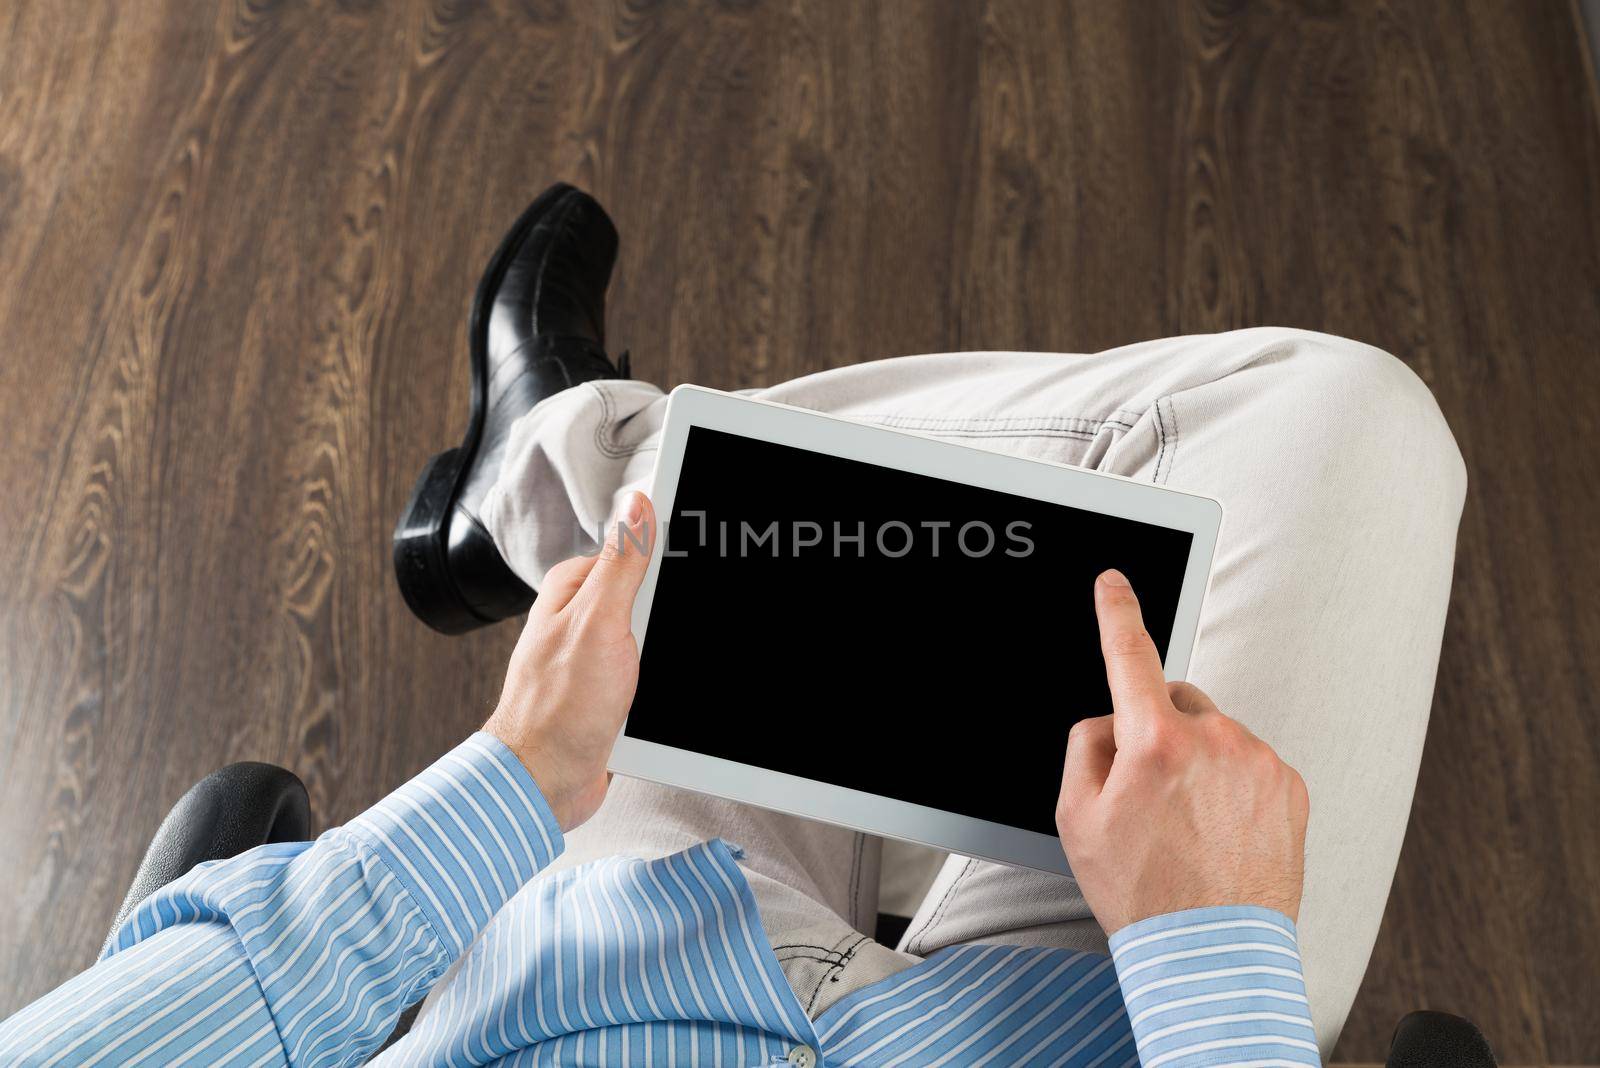 close-up of men's hands with a computer tablet. Businessman works in the office